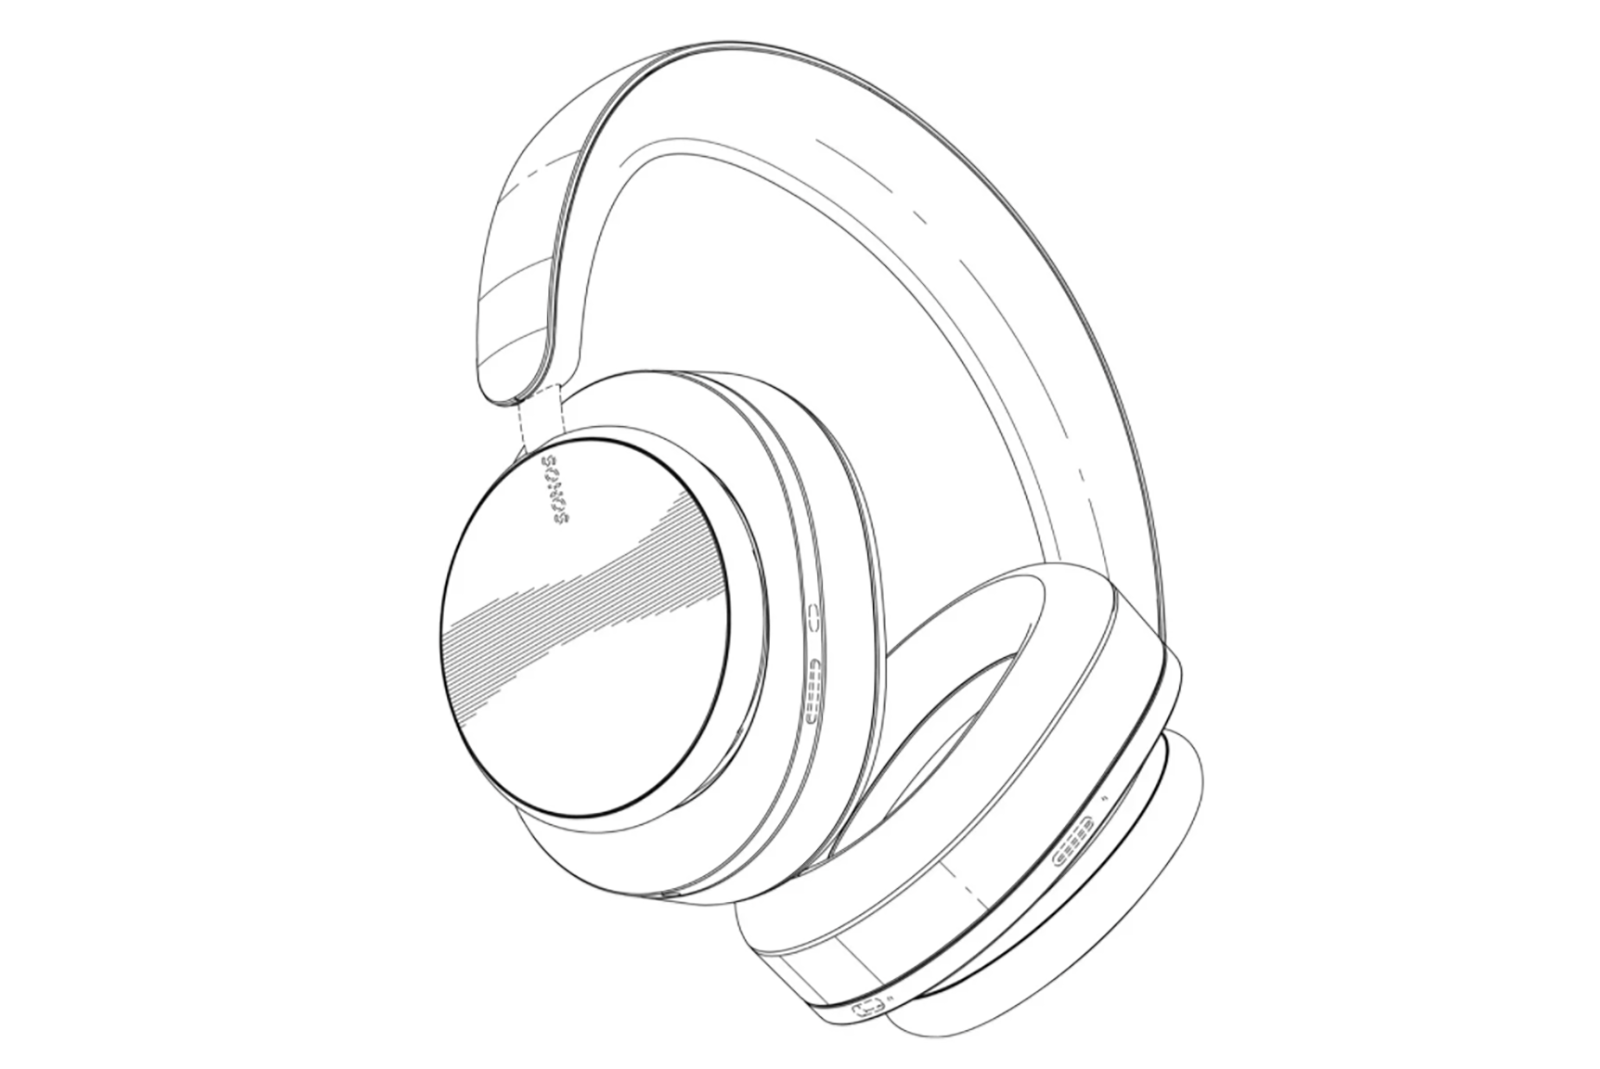 Latest Sonos patent reveals possible final design of its upcoming headphones photo 1